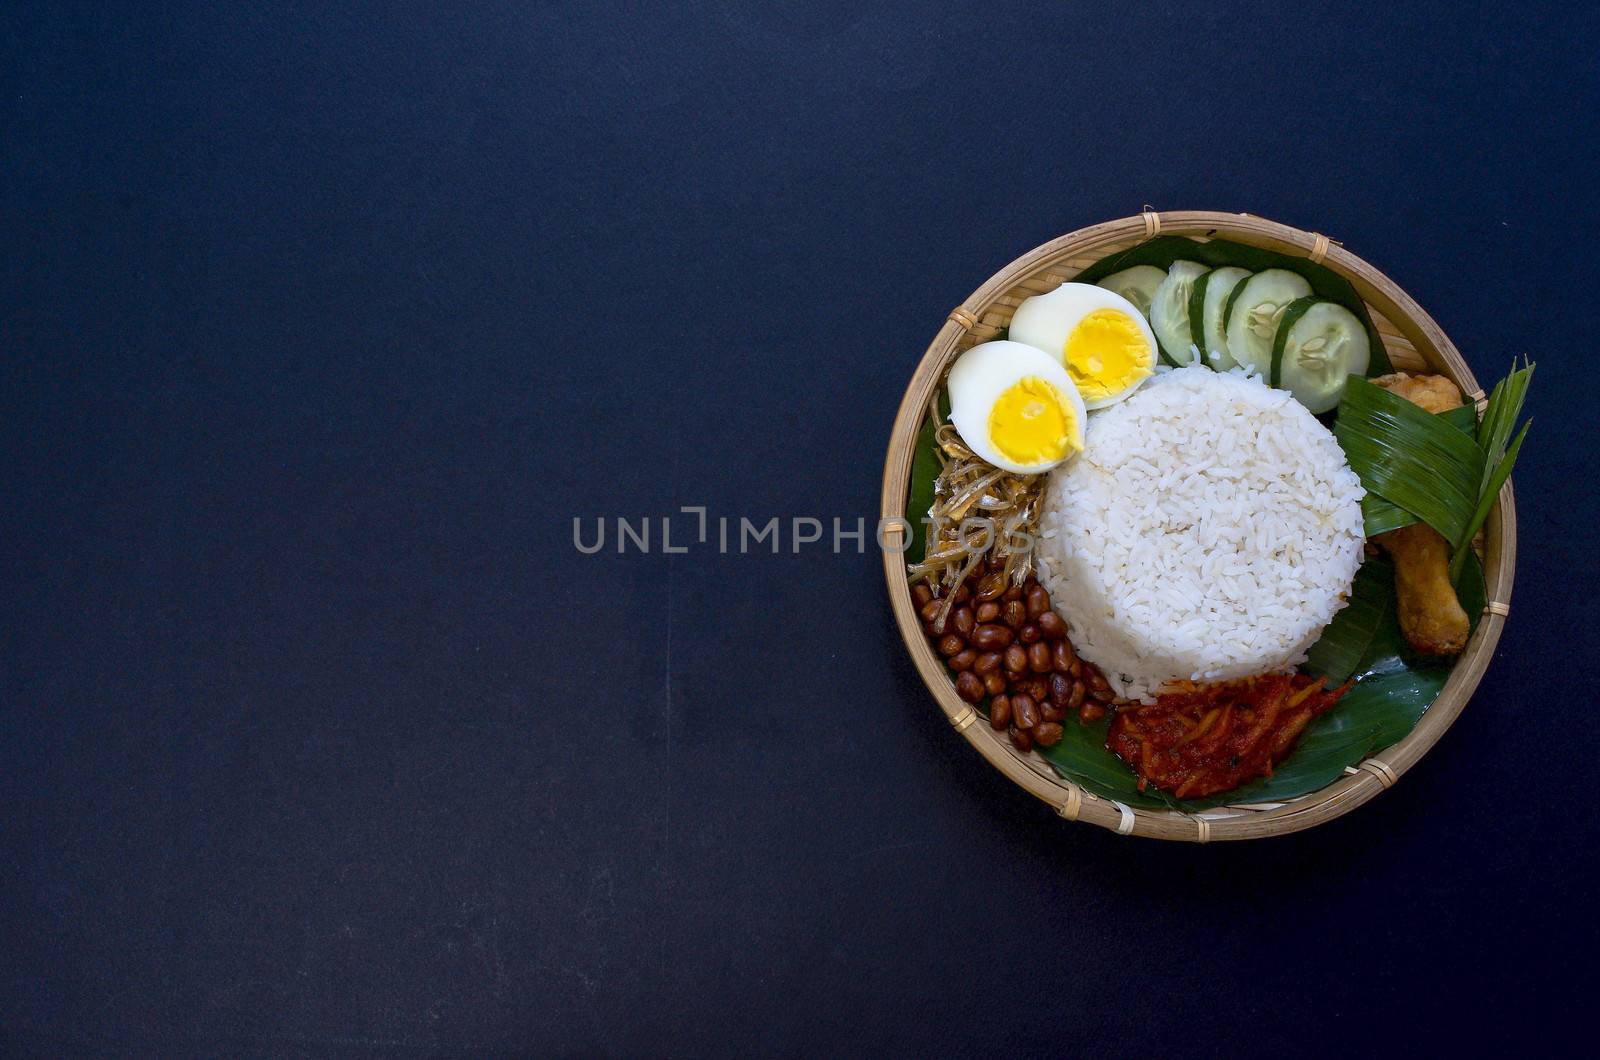 Nasi Lemak is a commonly found food in Malaysia, Brunei and Singapore. It is also an unofficial national food in Malaysia. Selective focus.